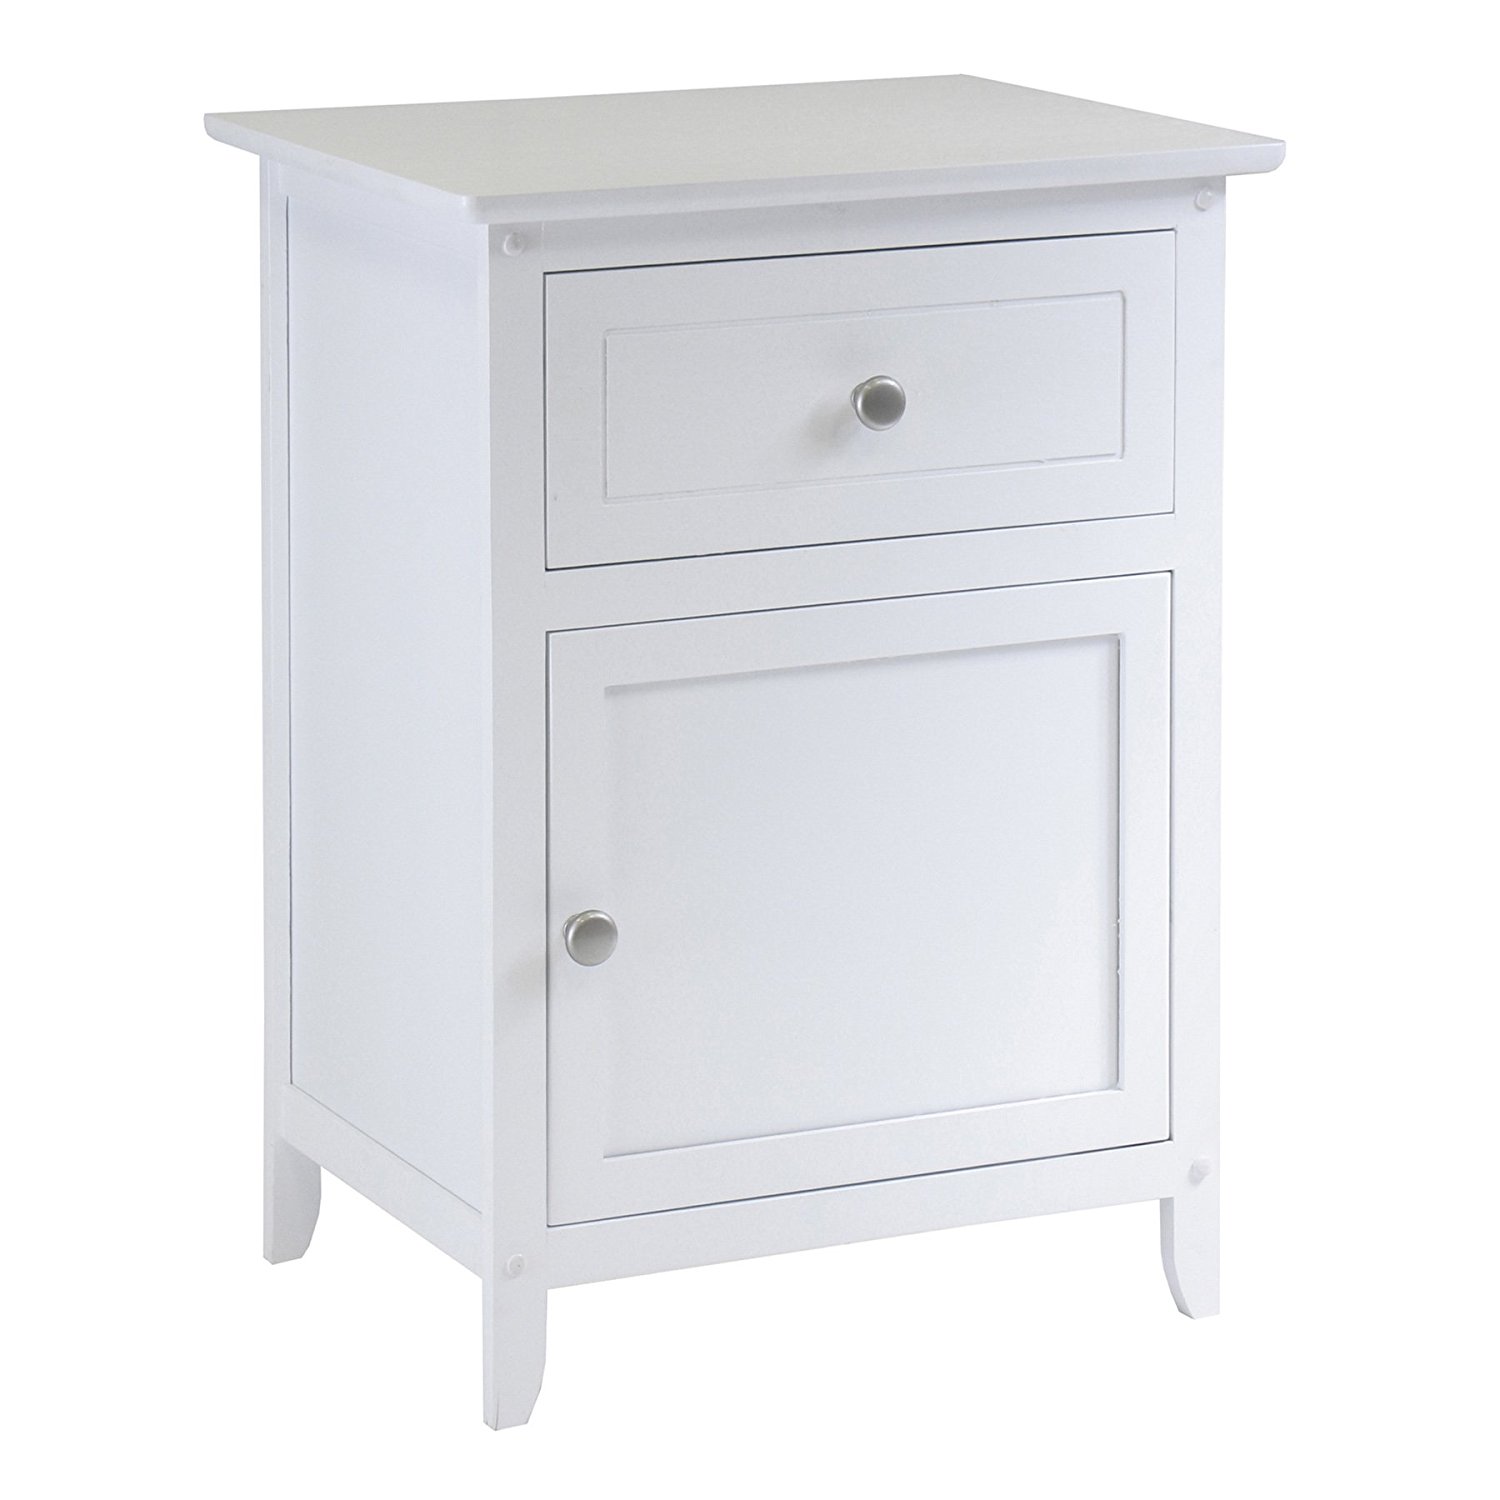 sturdy white bedroom end tables top terrific dark wood bedside table nightstand home interior superior excellent small for side from sofa with stools underneath homesense rugs